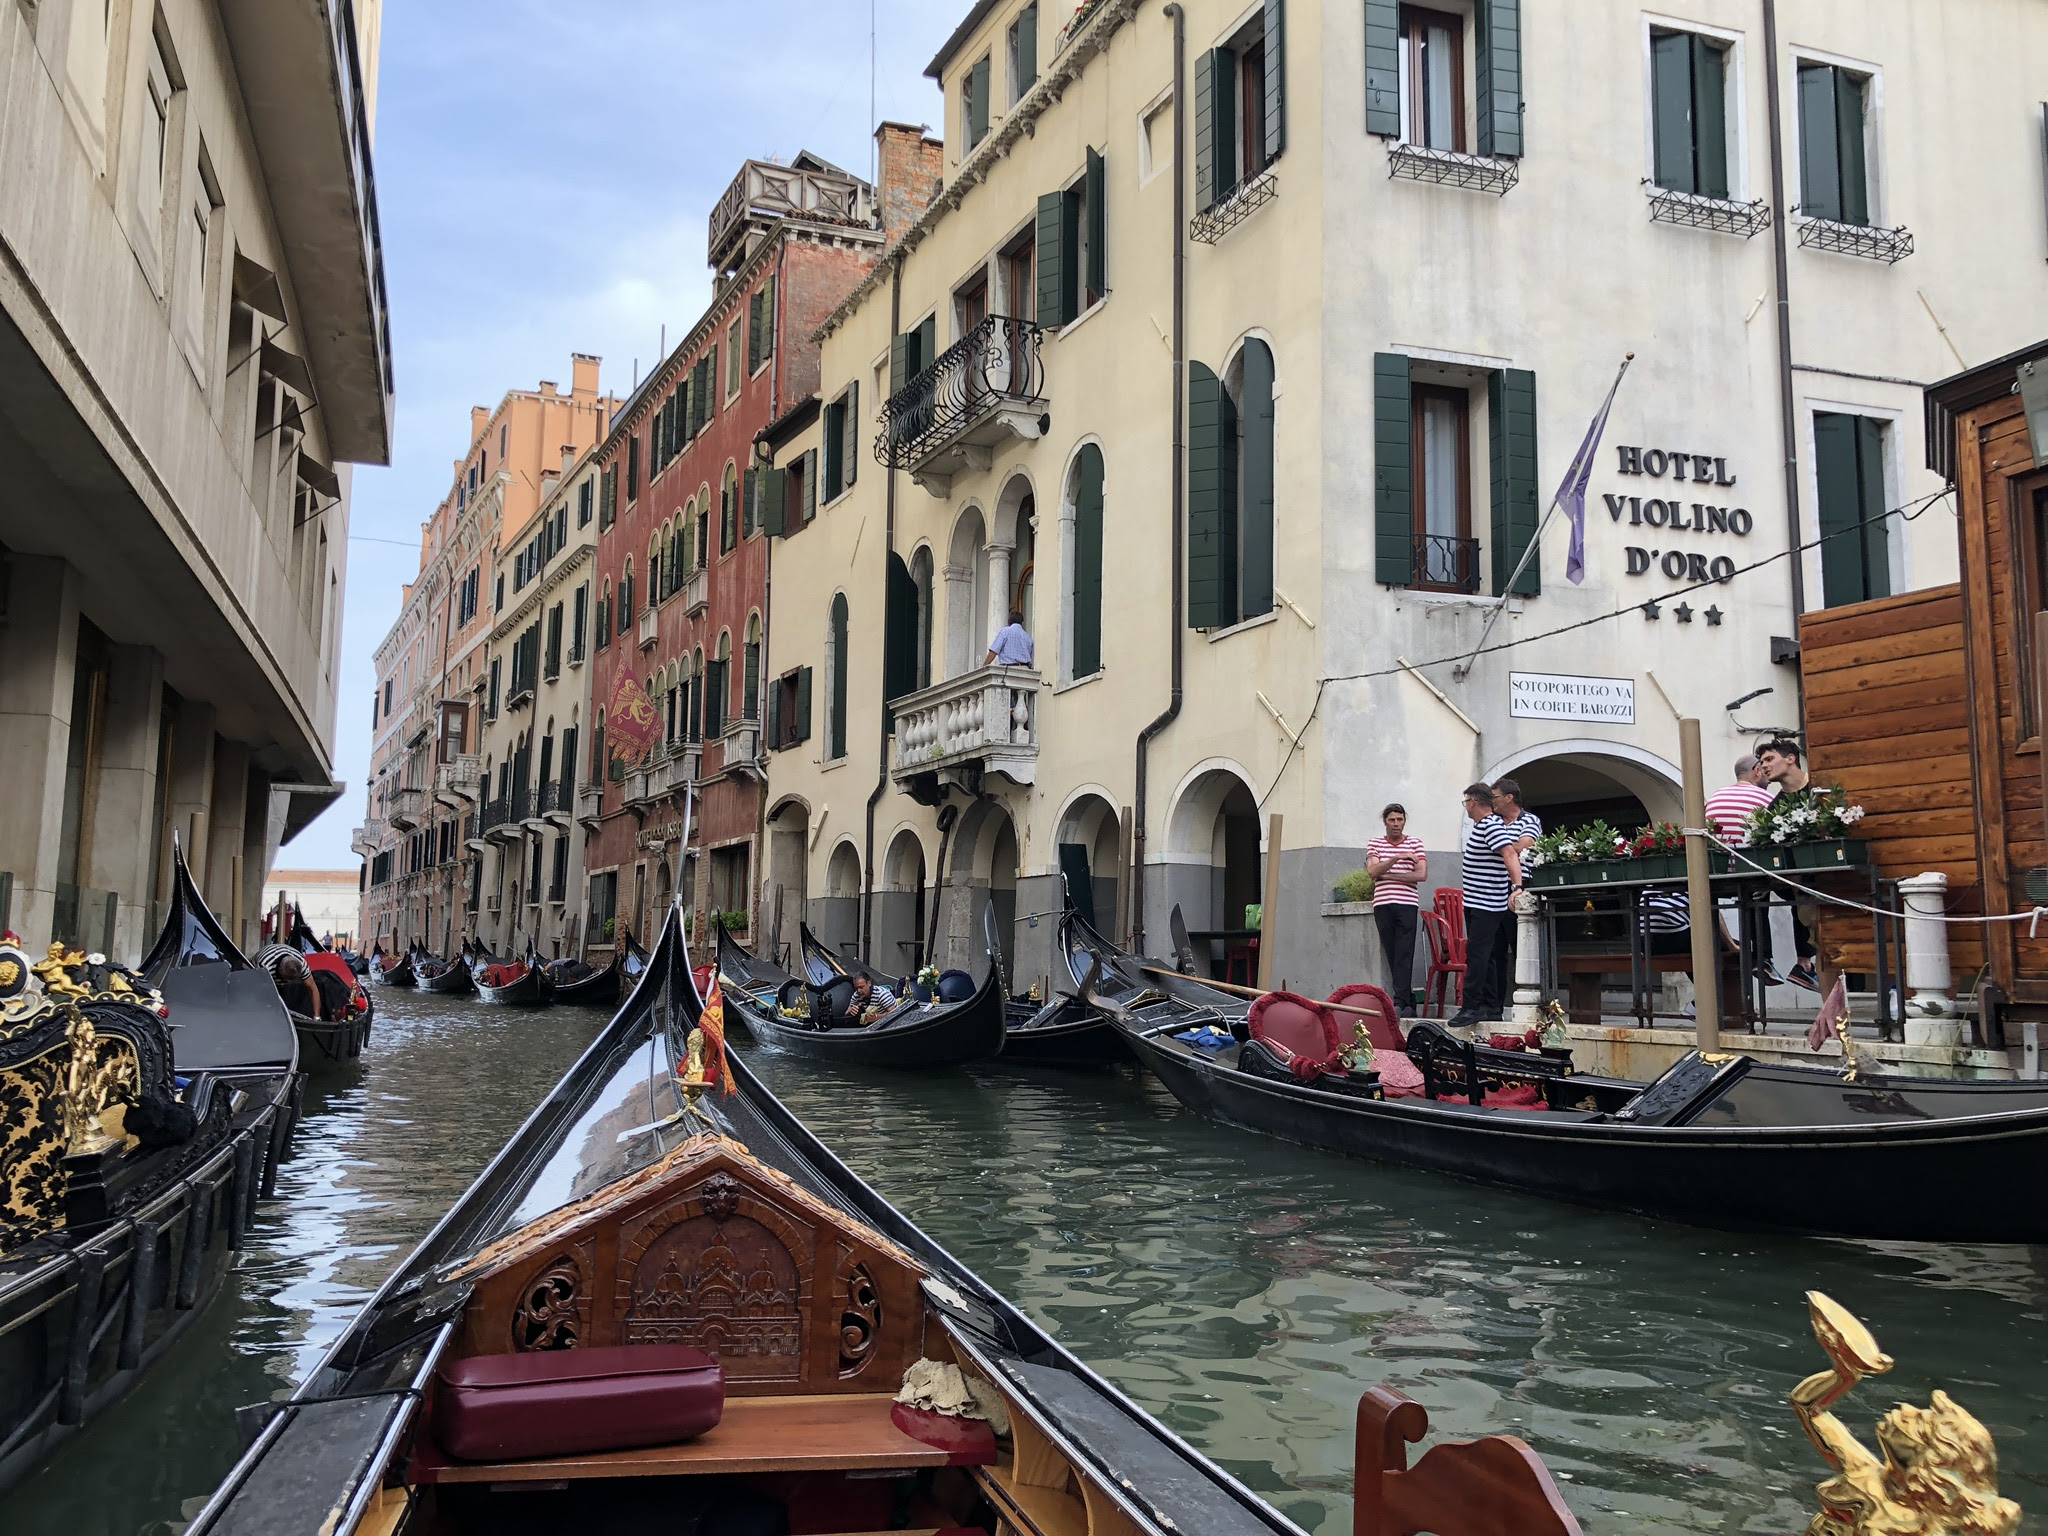 5 Day Verona & Venice Itinerary (with a Dolomites Side Trip!) is this